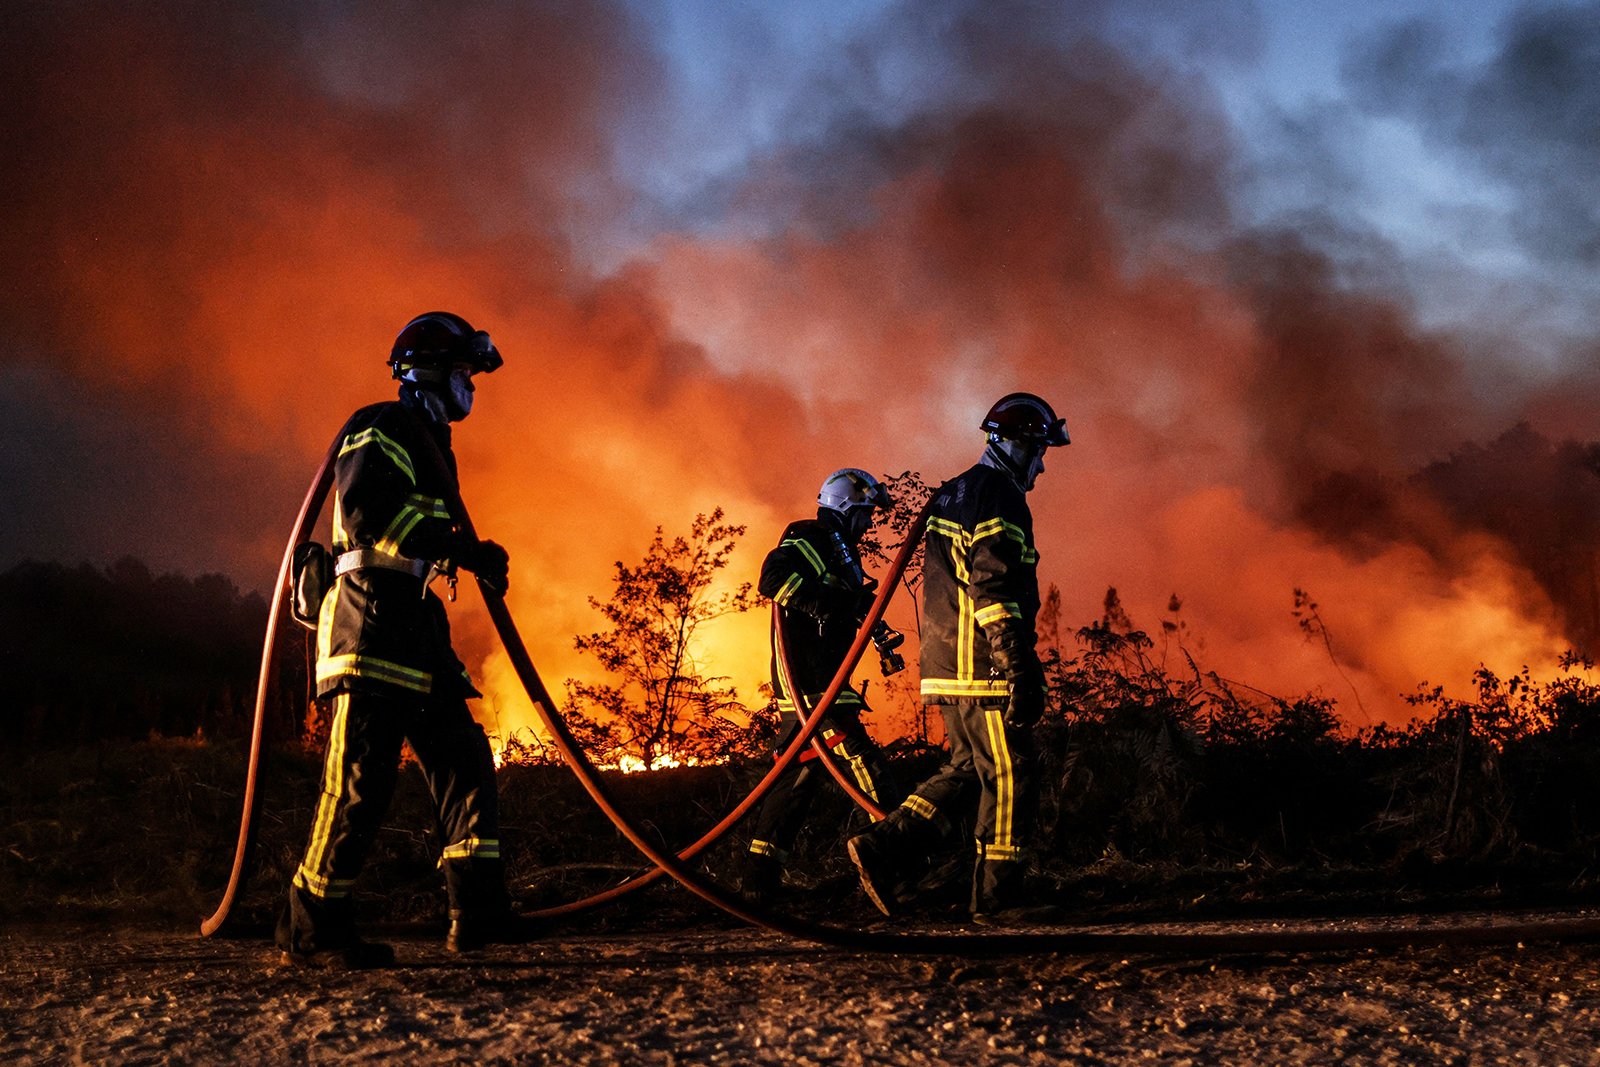 Firefighters try to control a forest fire in Louchats, in the Gironde area of southwestern France, on July 17.